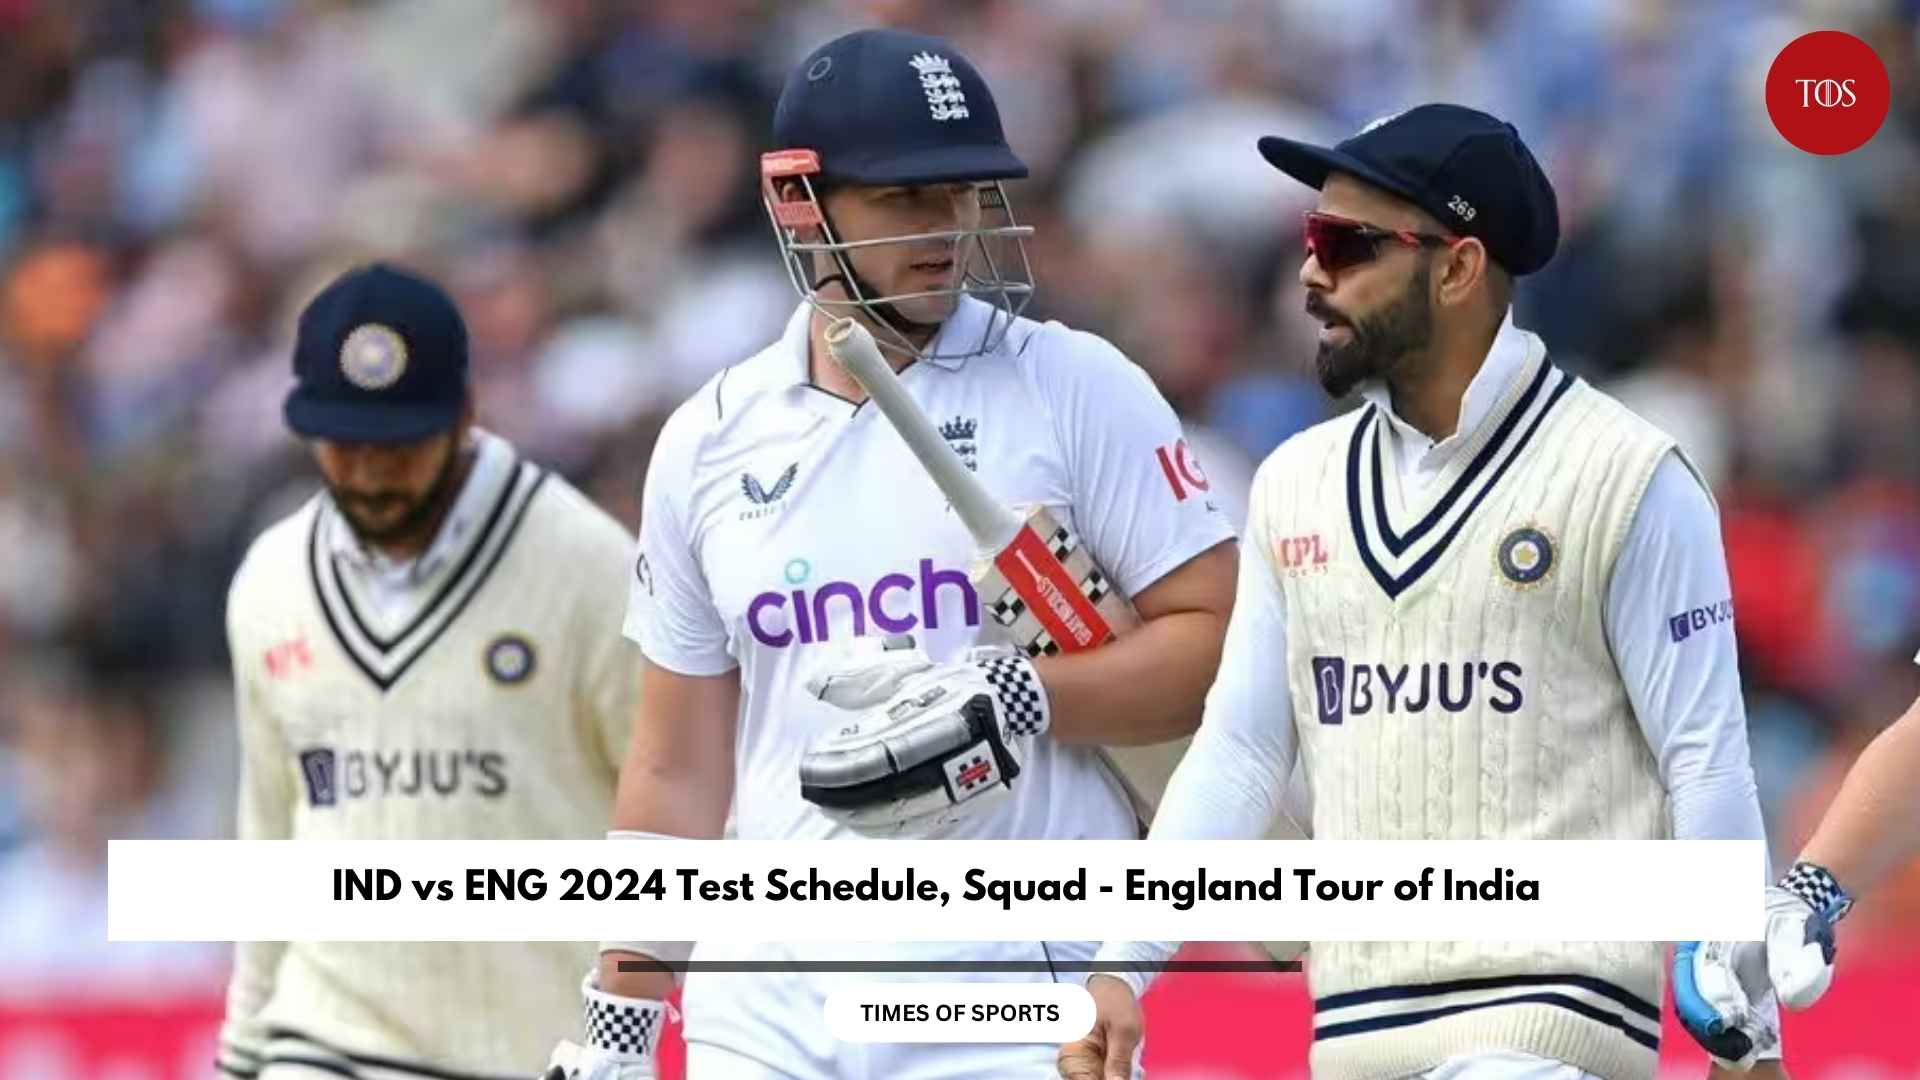 IND vs ENG 2024 Test Schedule, Squad England Tour of India